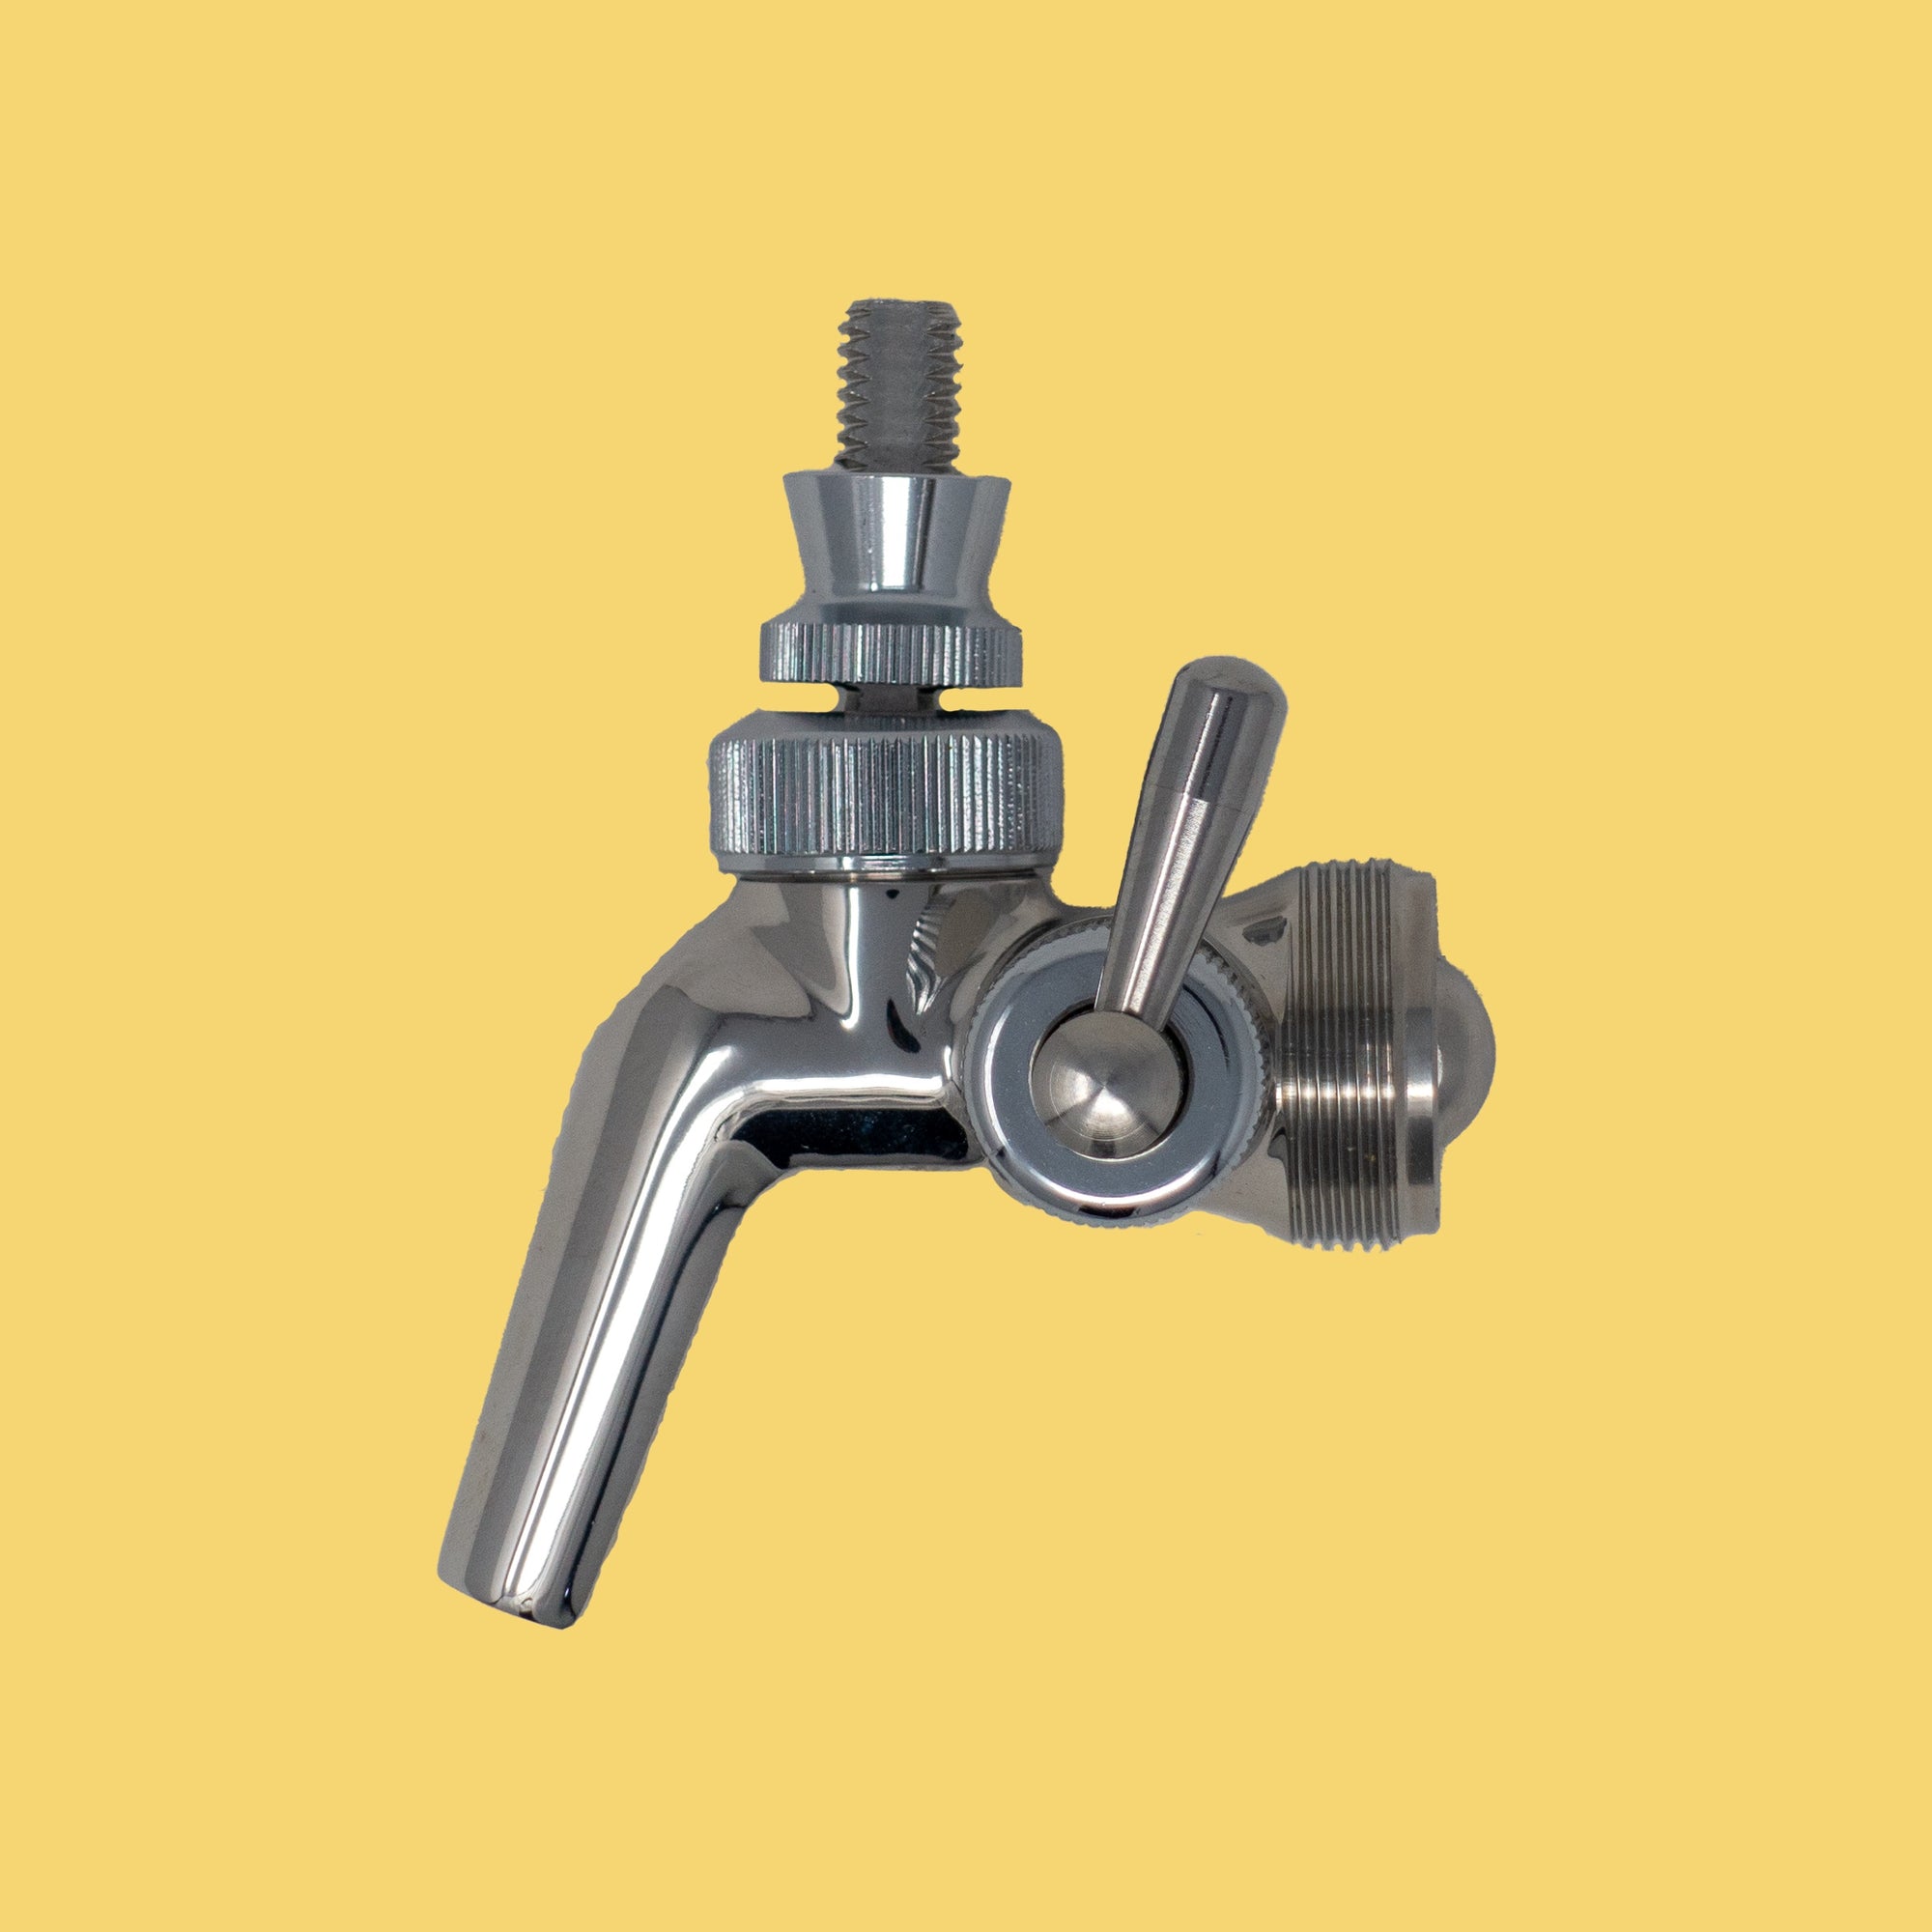 Perlick 650SS Flow Control Stainless Steel Faucet